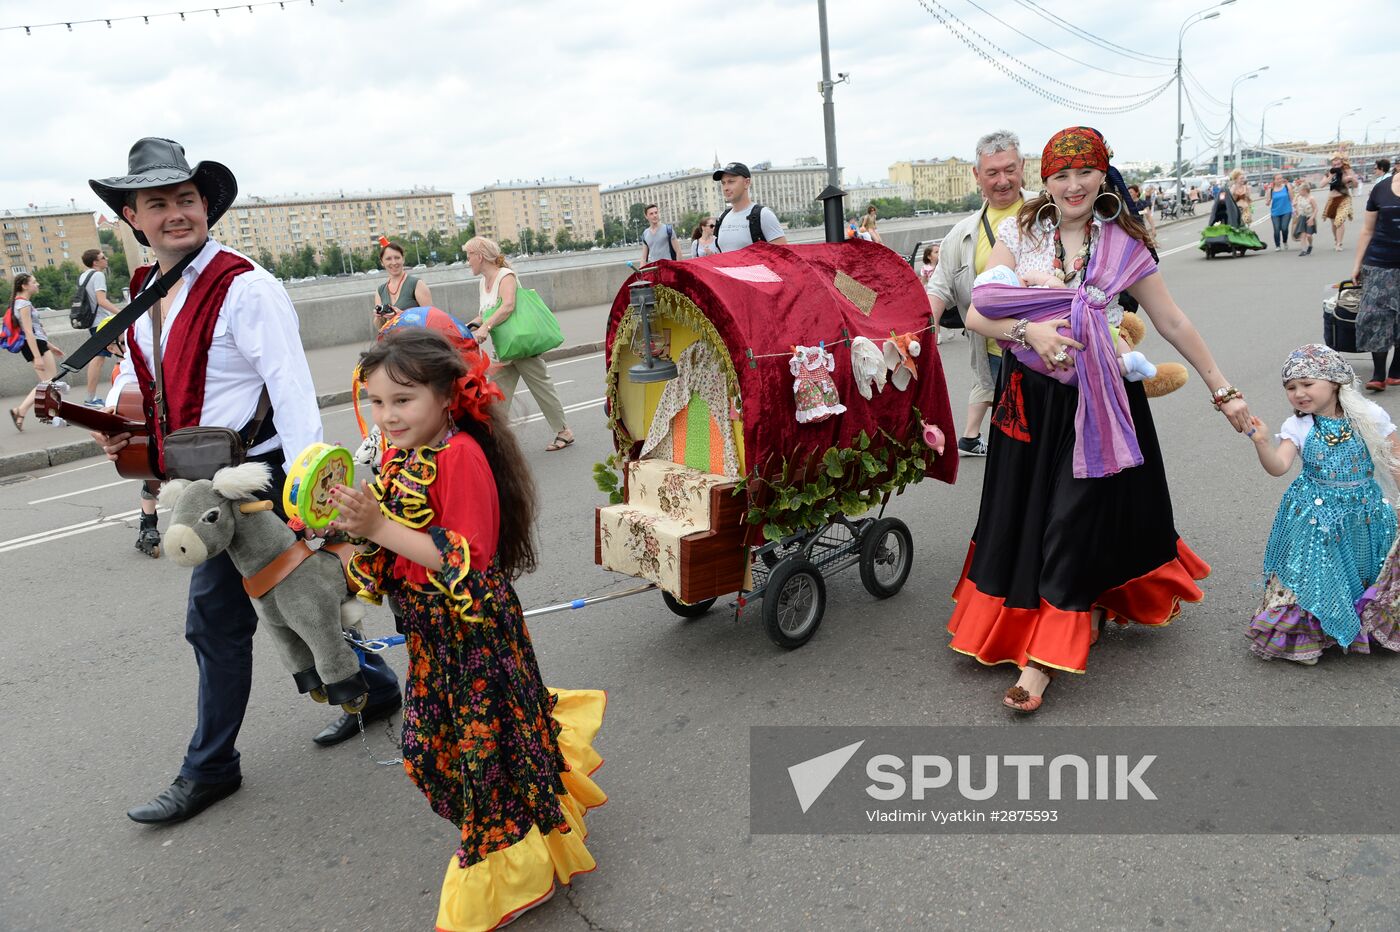 Baby stroller parade in Gorky Park, Moscow